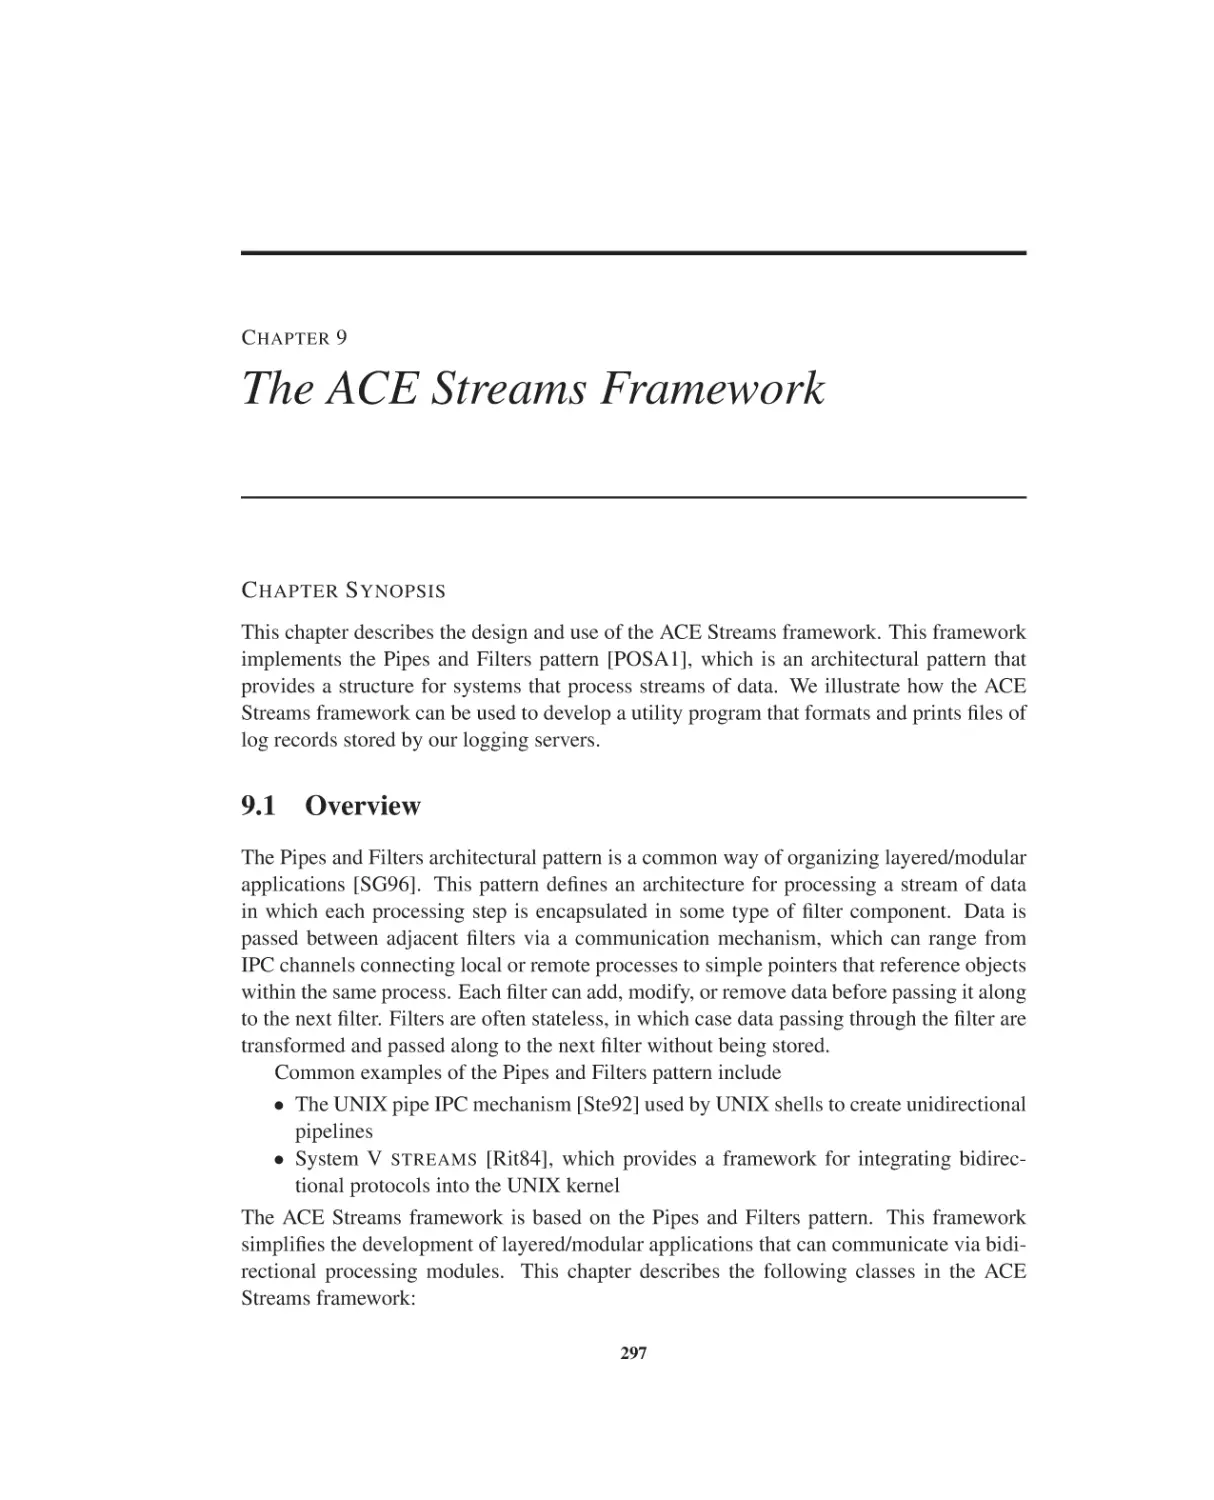 Chapter 9 The ACE Streams Framework
9.1 Overview